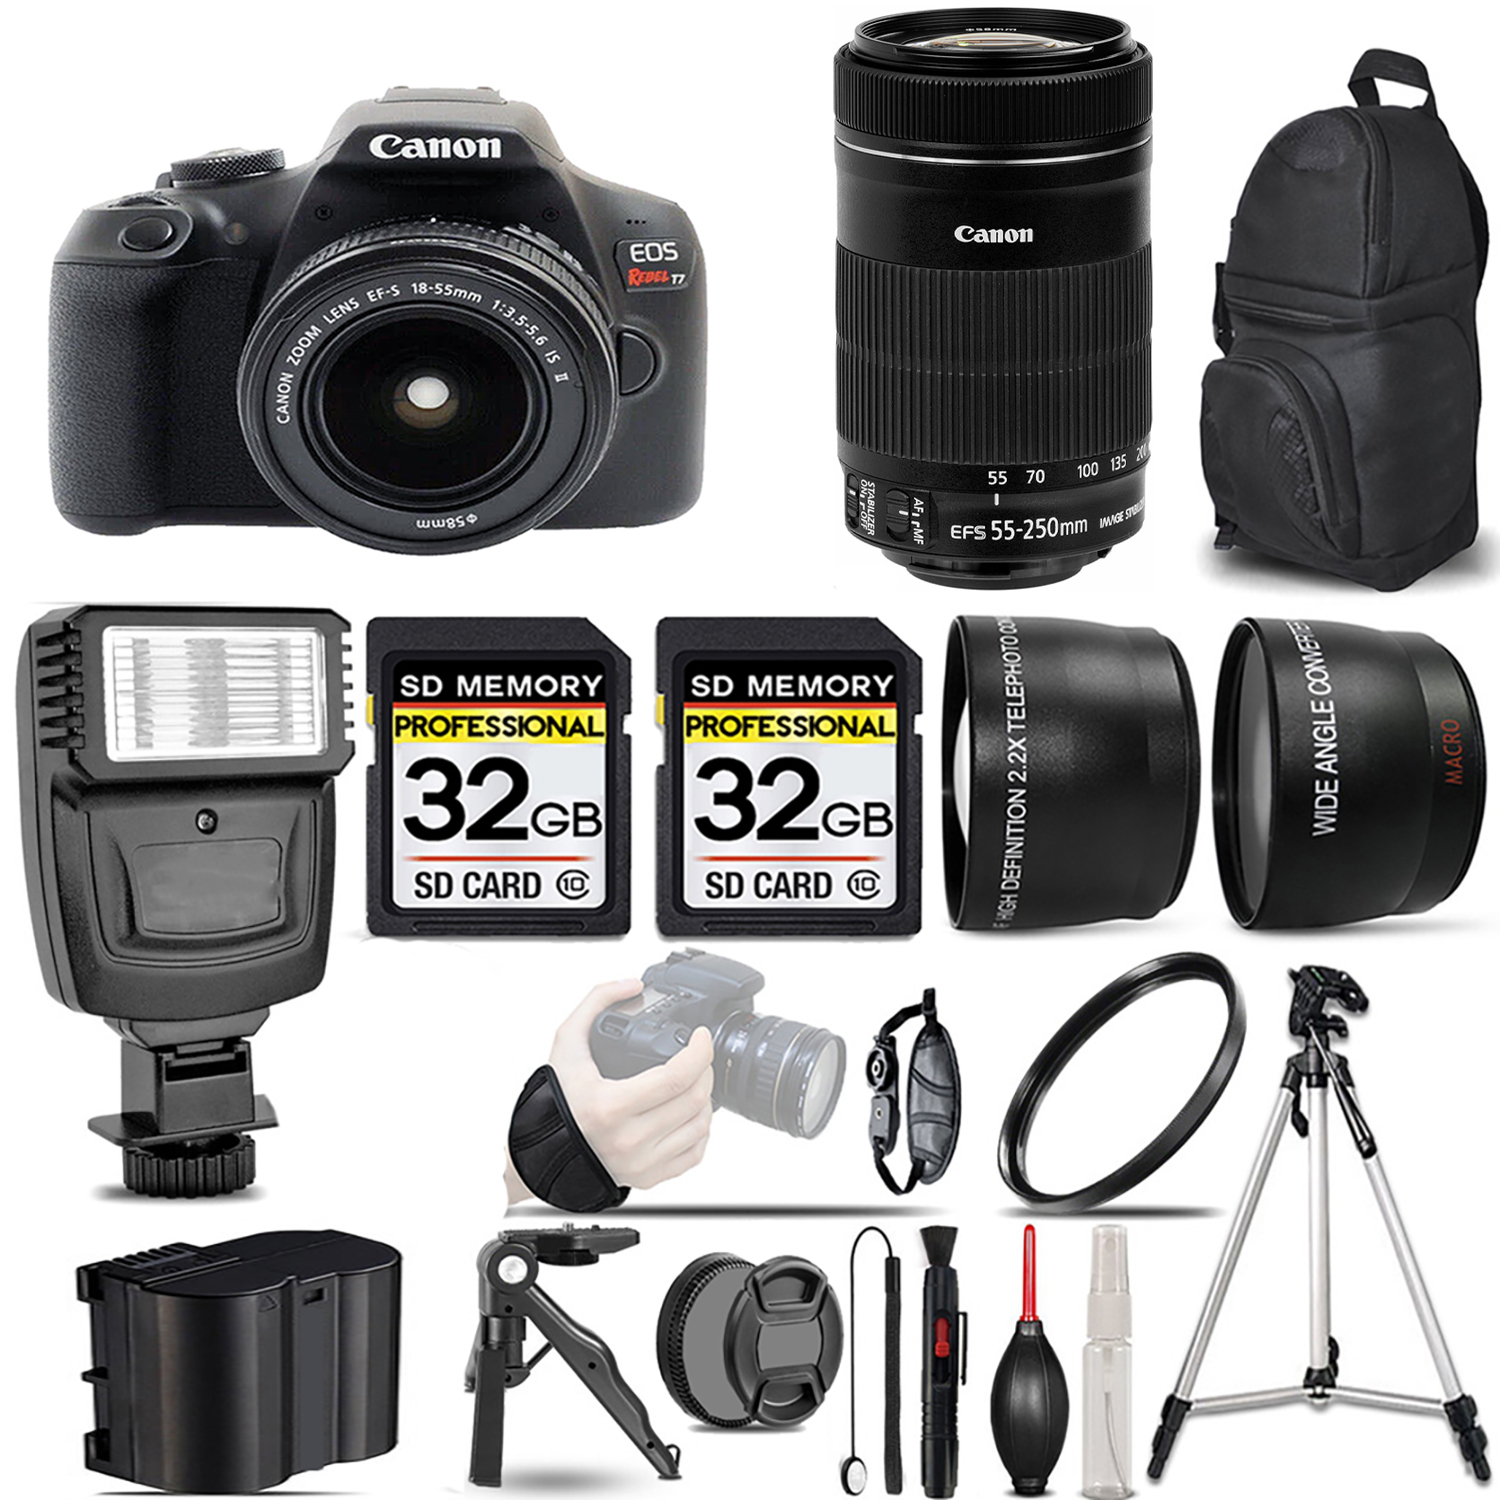 EOS Rebel T7 with 18-55mm Lens + 55-250mm f/4-5.6 IS STM Lens + Flash + 64GB - Kit *FREE SHIPPING*